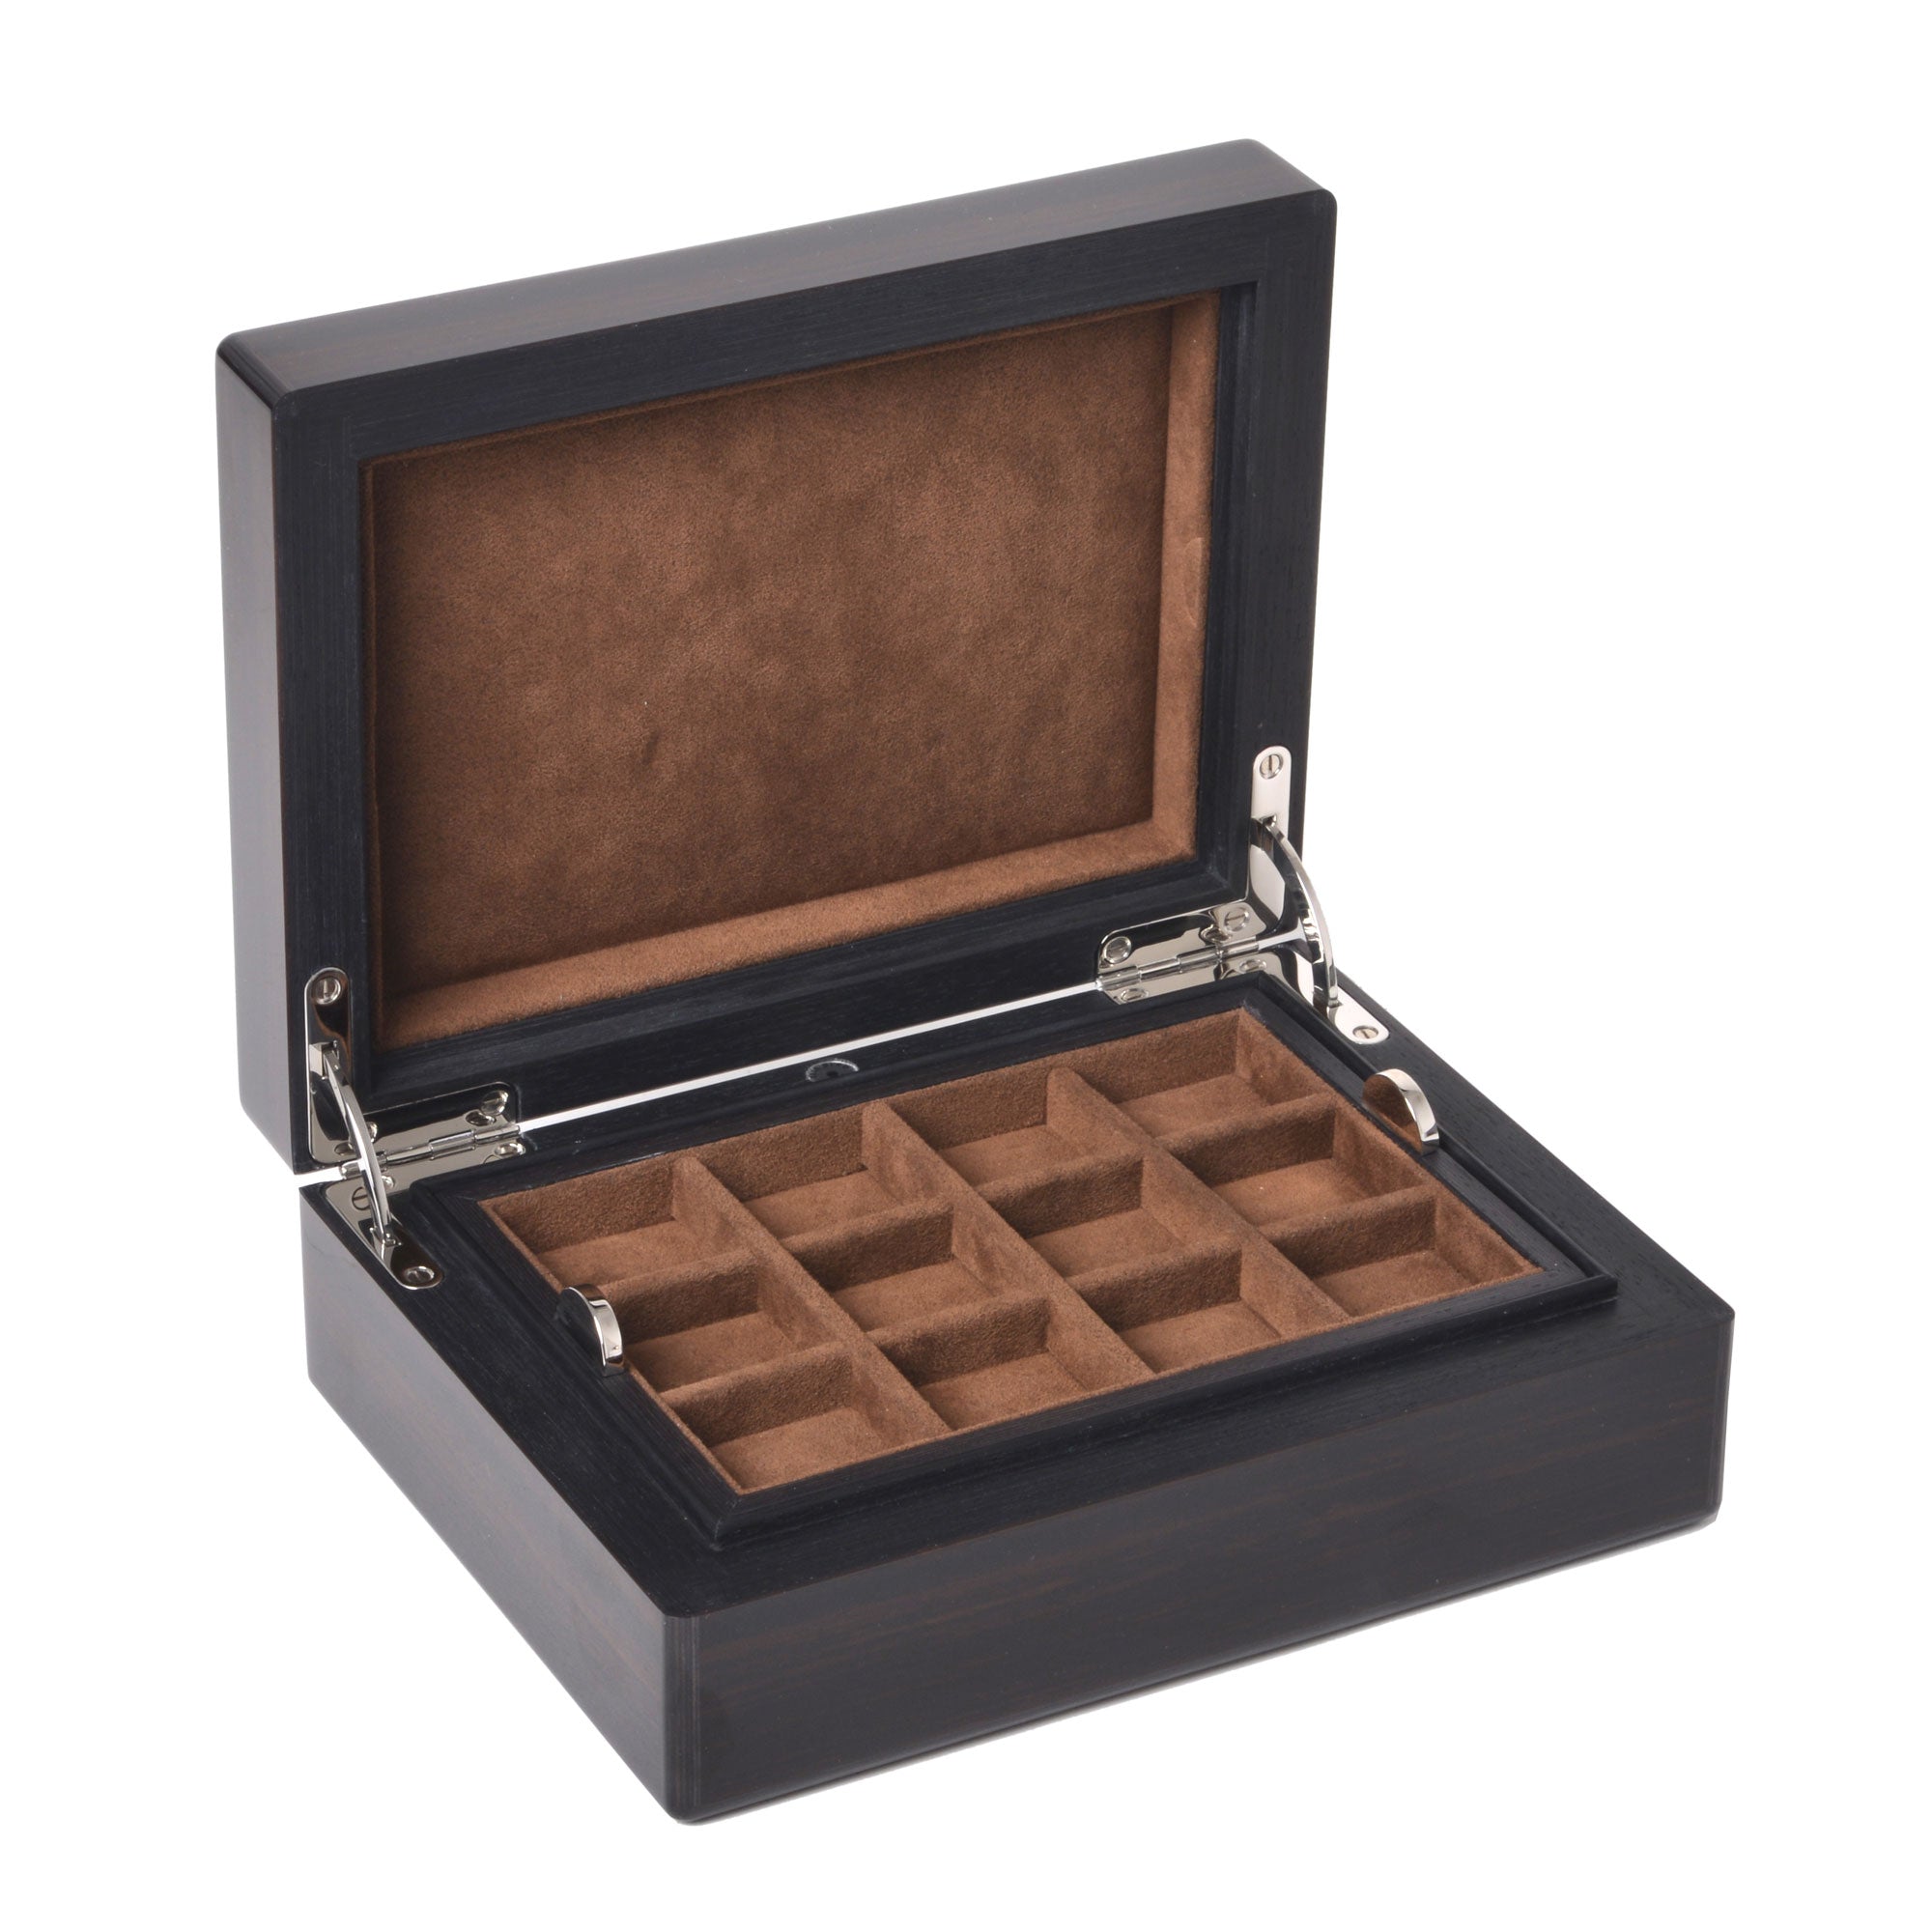 "Classique" - Boxed set of 24 rings or 24 pairs of cufflinks